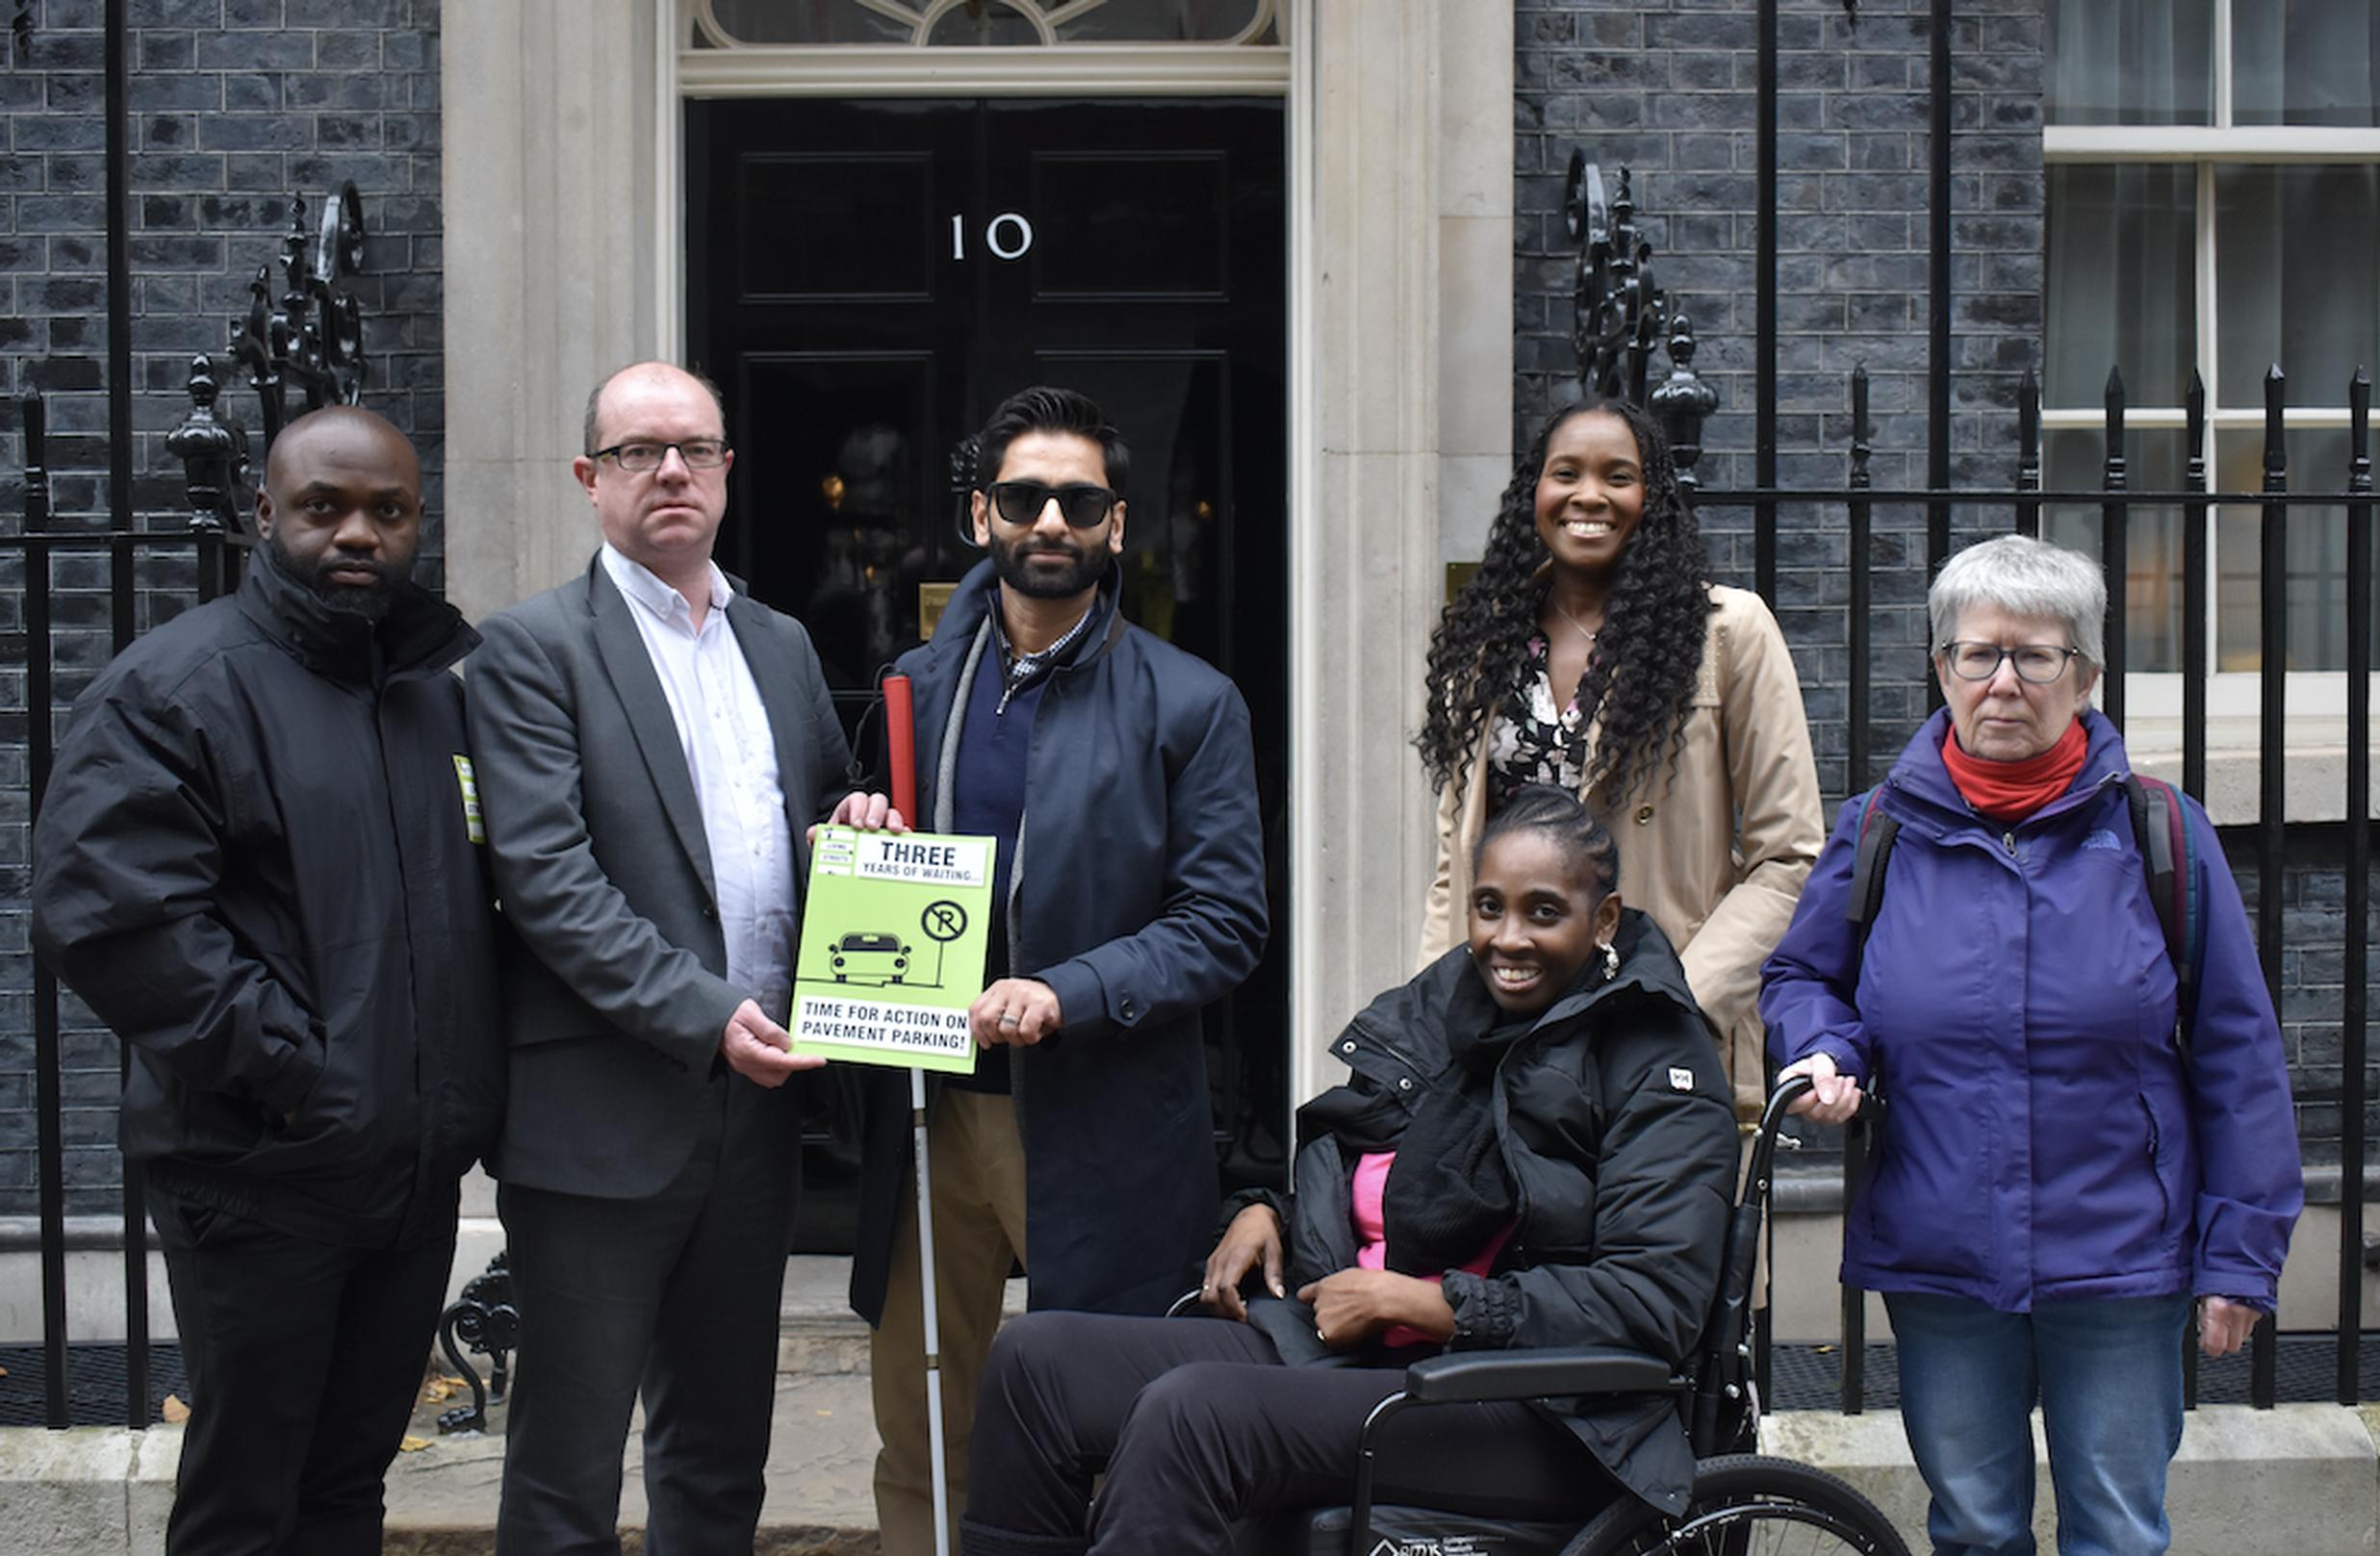 Living Streets representatives at 10 Downing Street with pavement parking ‘anniversary card’. (L-R) Bolaji Ogunsola (Living Streets Dagenham Over 65s Local Group), Stephen Edwards (chief executive, Living Streets), Dr Amit Patel (disability campaigner and Living Streets’ trustee), Patricia Edeam (Living Streets’ project coordinator), Catherine Edeam and Susie Morrow (Living Streets Wandsworth Local Group).